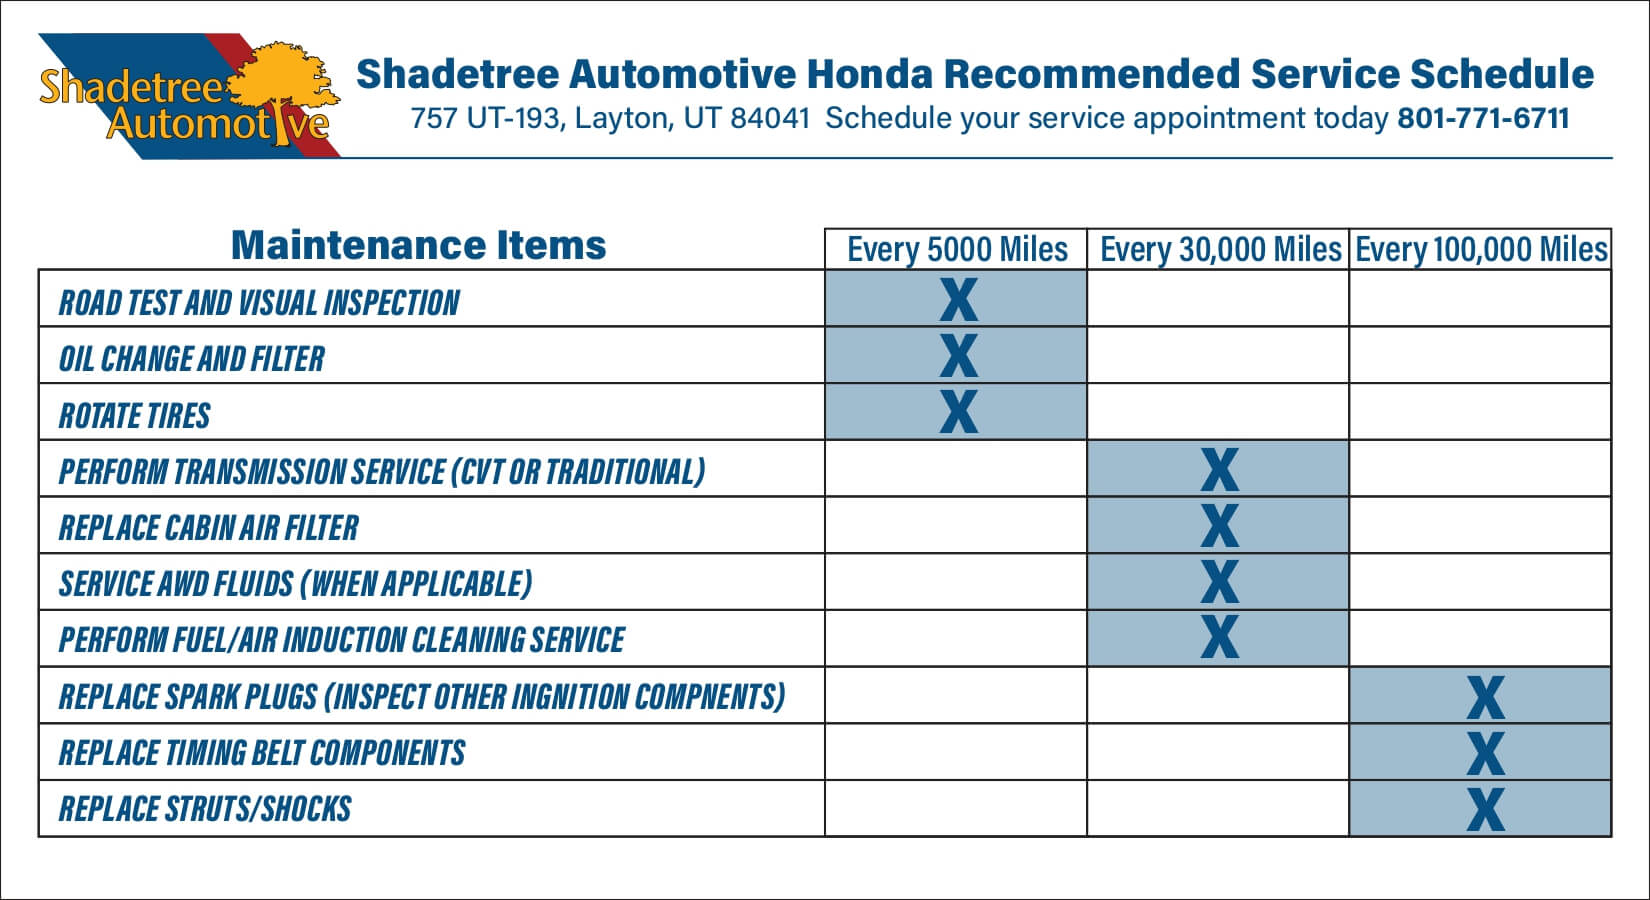 Shadetree Automotive Honda Recommended Service Schedule